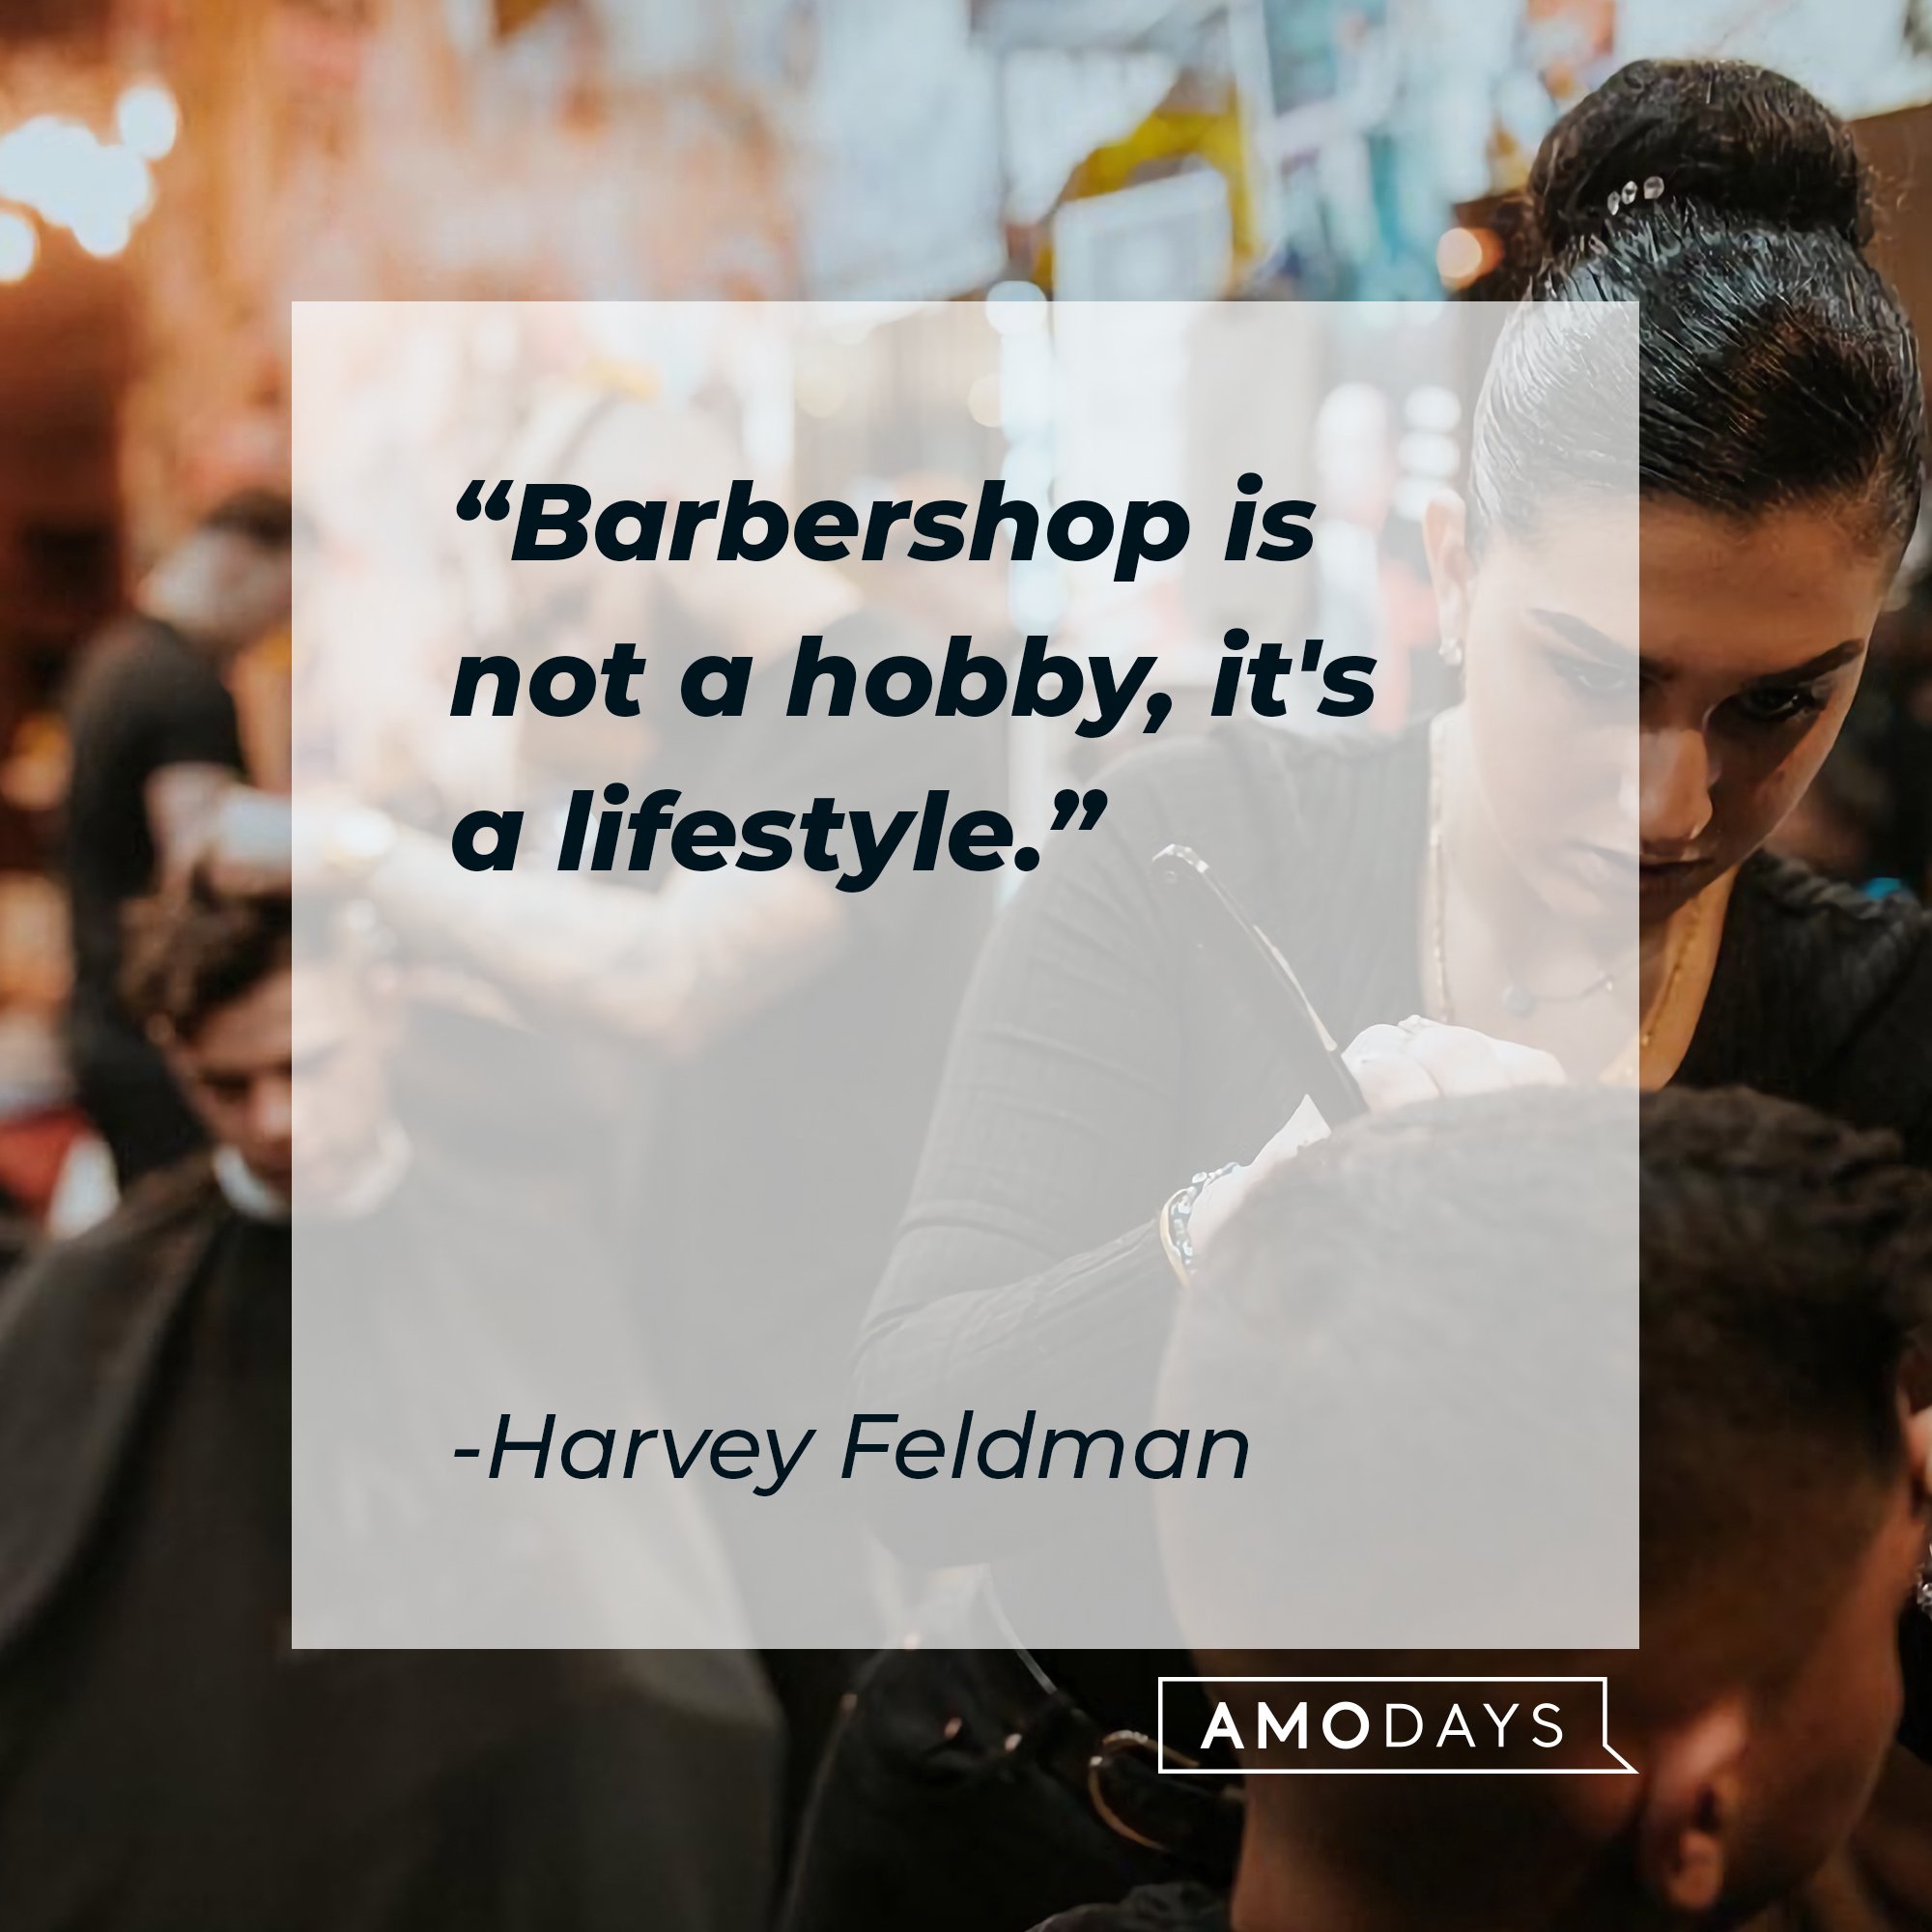 Harvey Feldman's quote: "Barbershop is not a hobby, it's a lifestyle." | Image: AmoDays